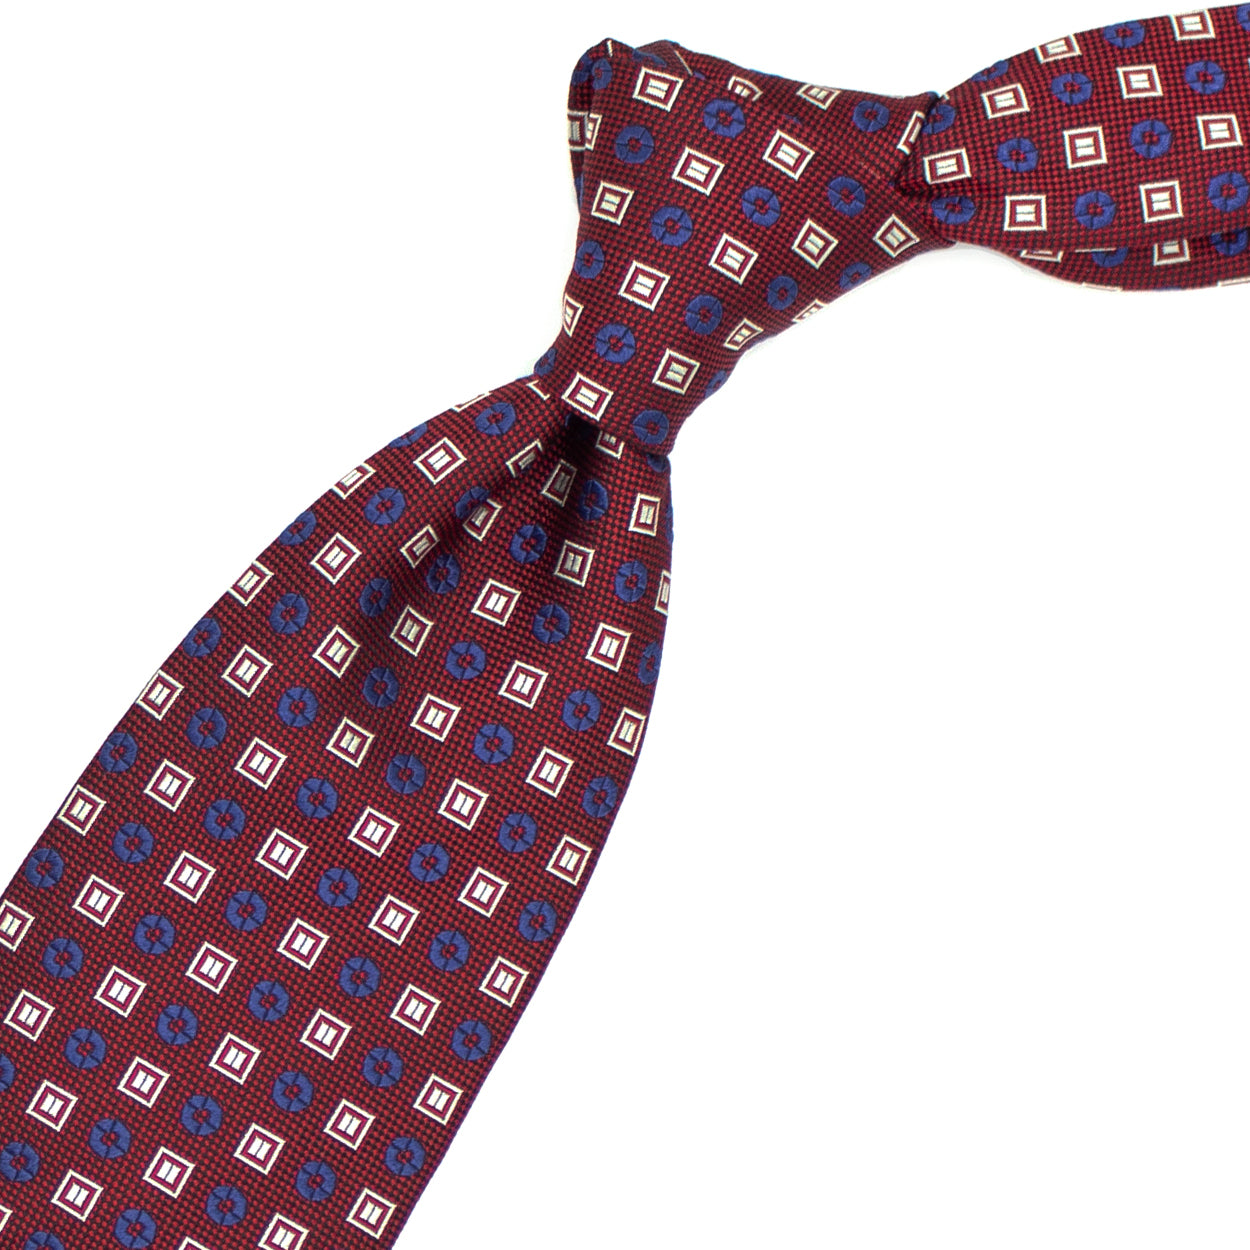 Bordeaux tie with blue flowers and white squares